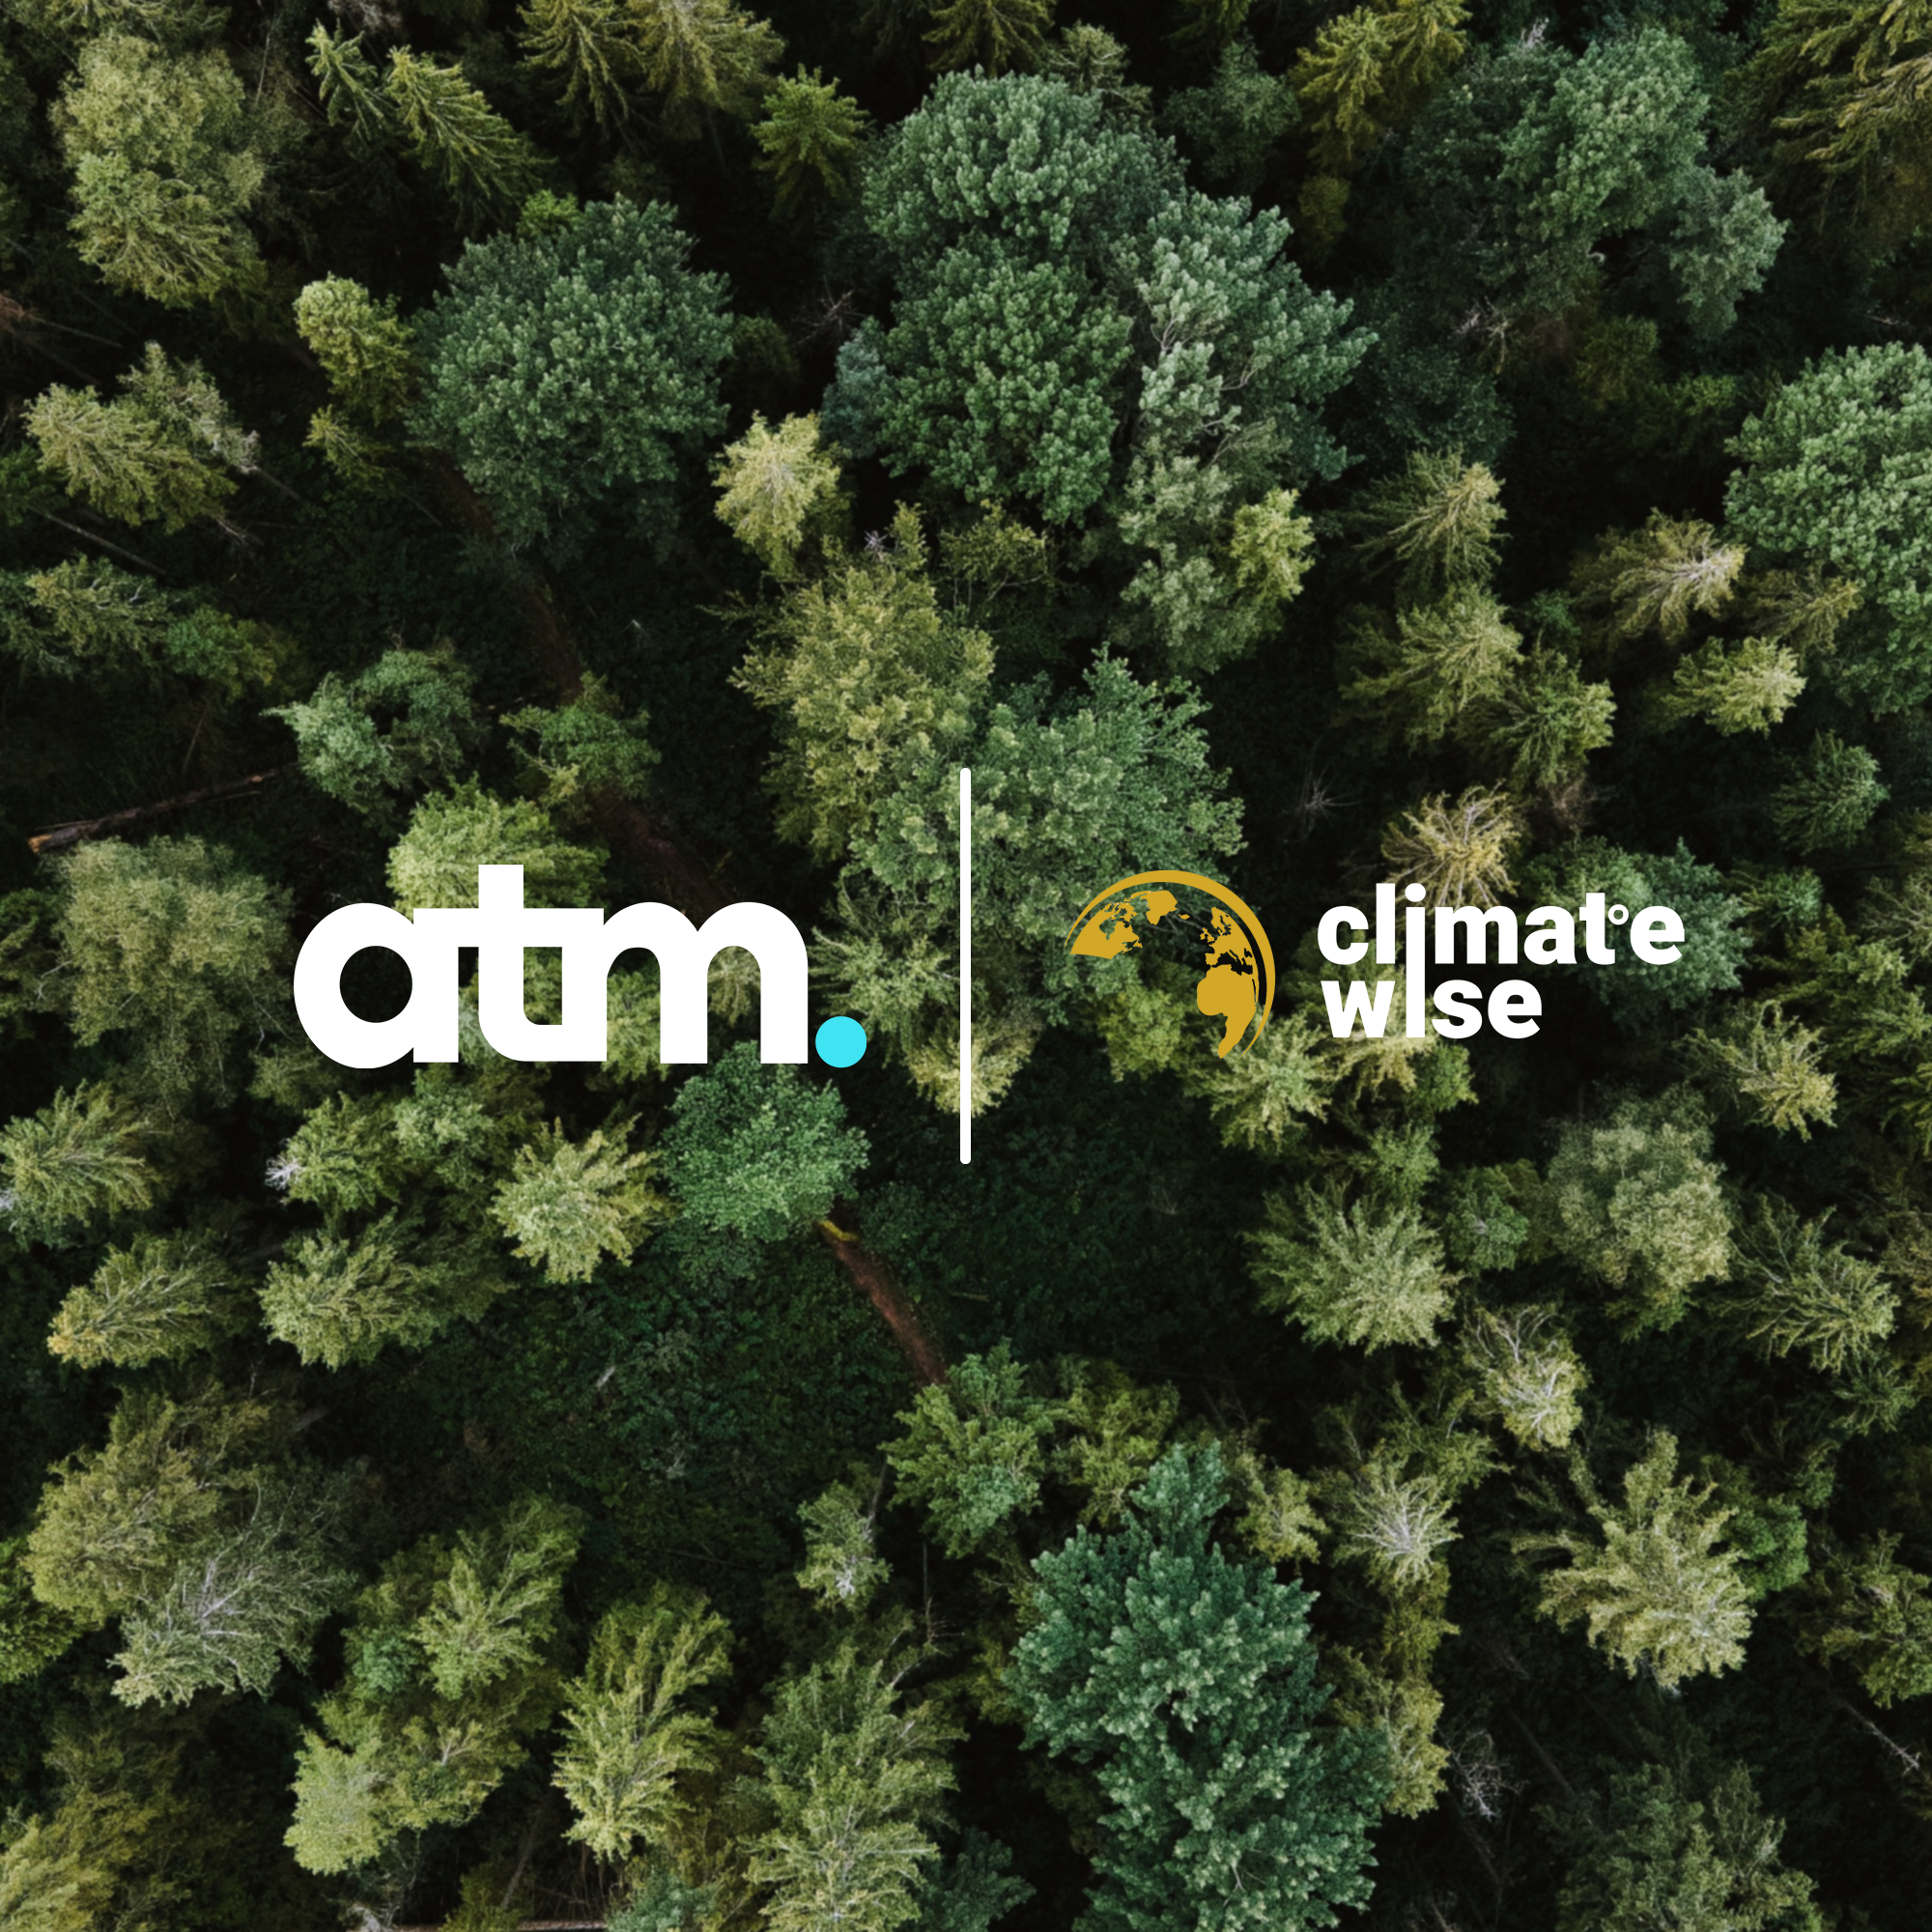 Climate wise and ATM Logo